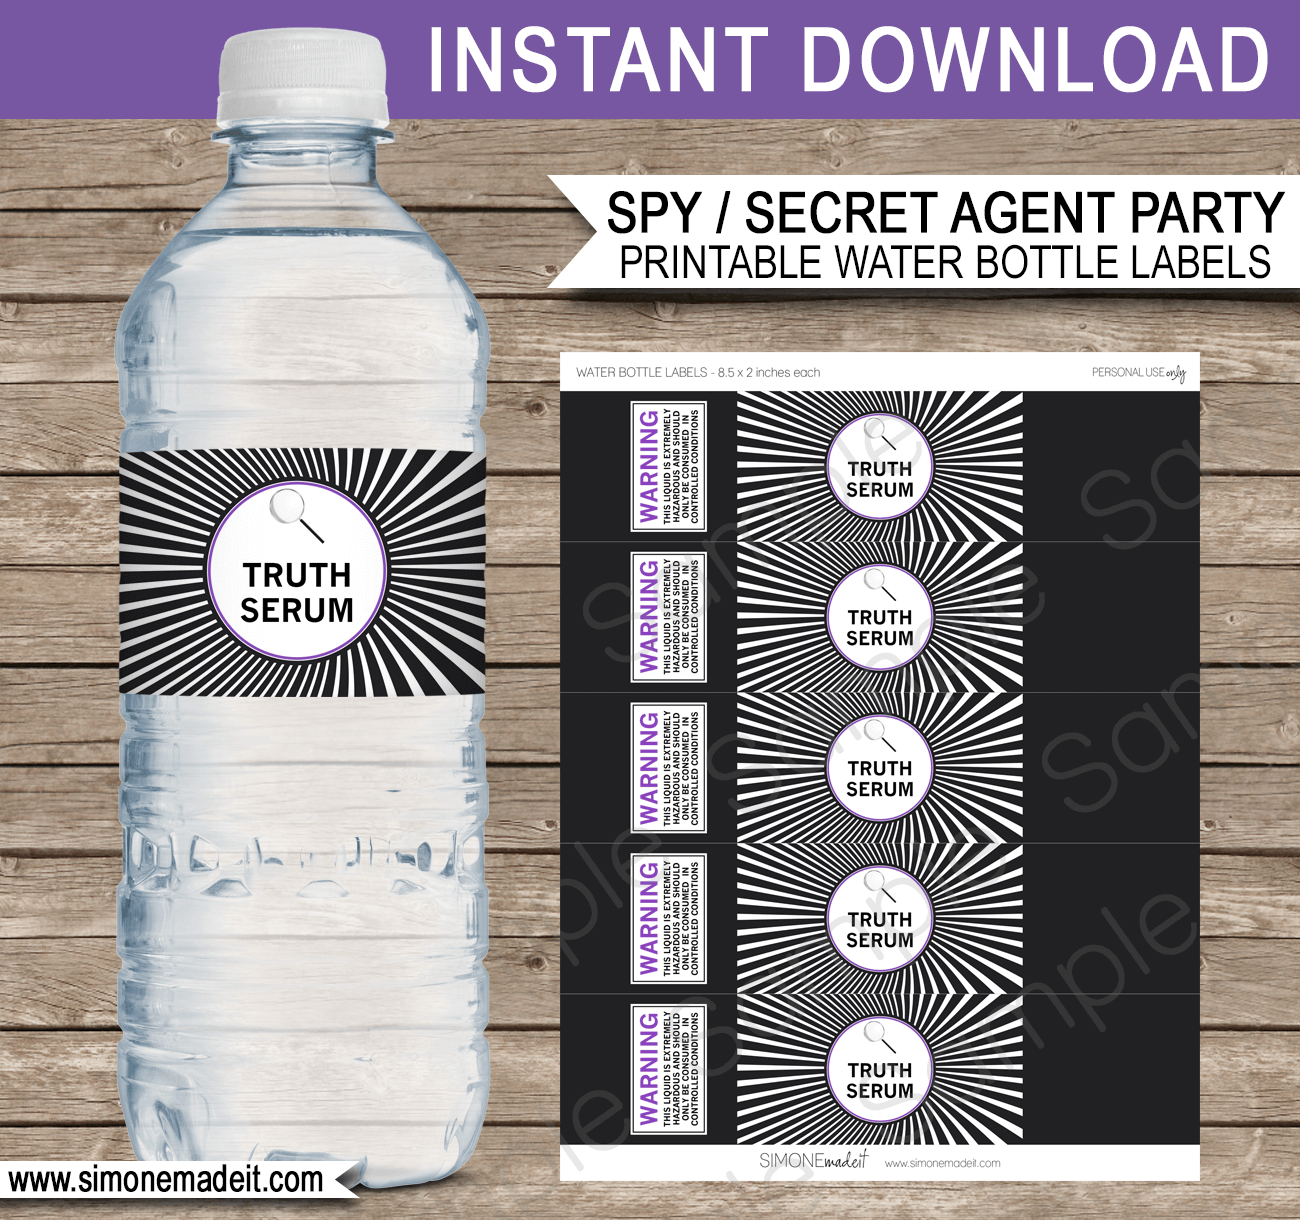 Girls Spy Party Water Bottle Labels | Truth Serum | Secret Agent Birthday Party Printable Template | $3.00 INSTANT DOWNLOAD via SIMONEmadeit.com